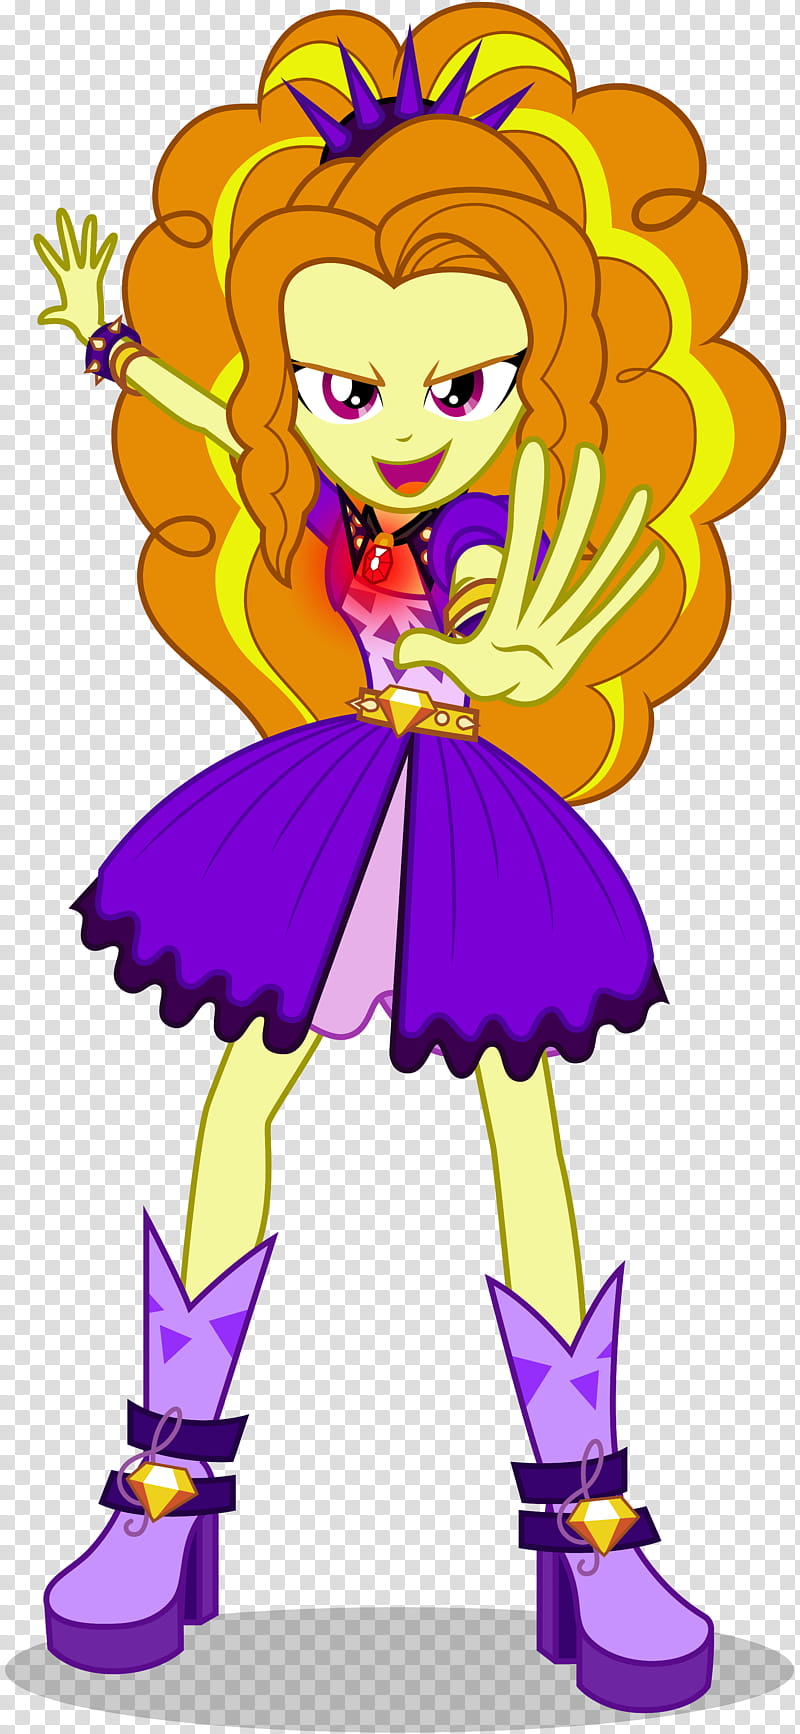 Adagio Dazzle Crashing Down, female cartoon character wearing purple dress transparent background PNG clipart